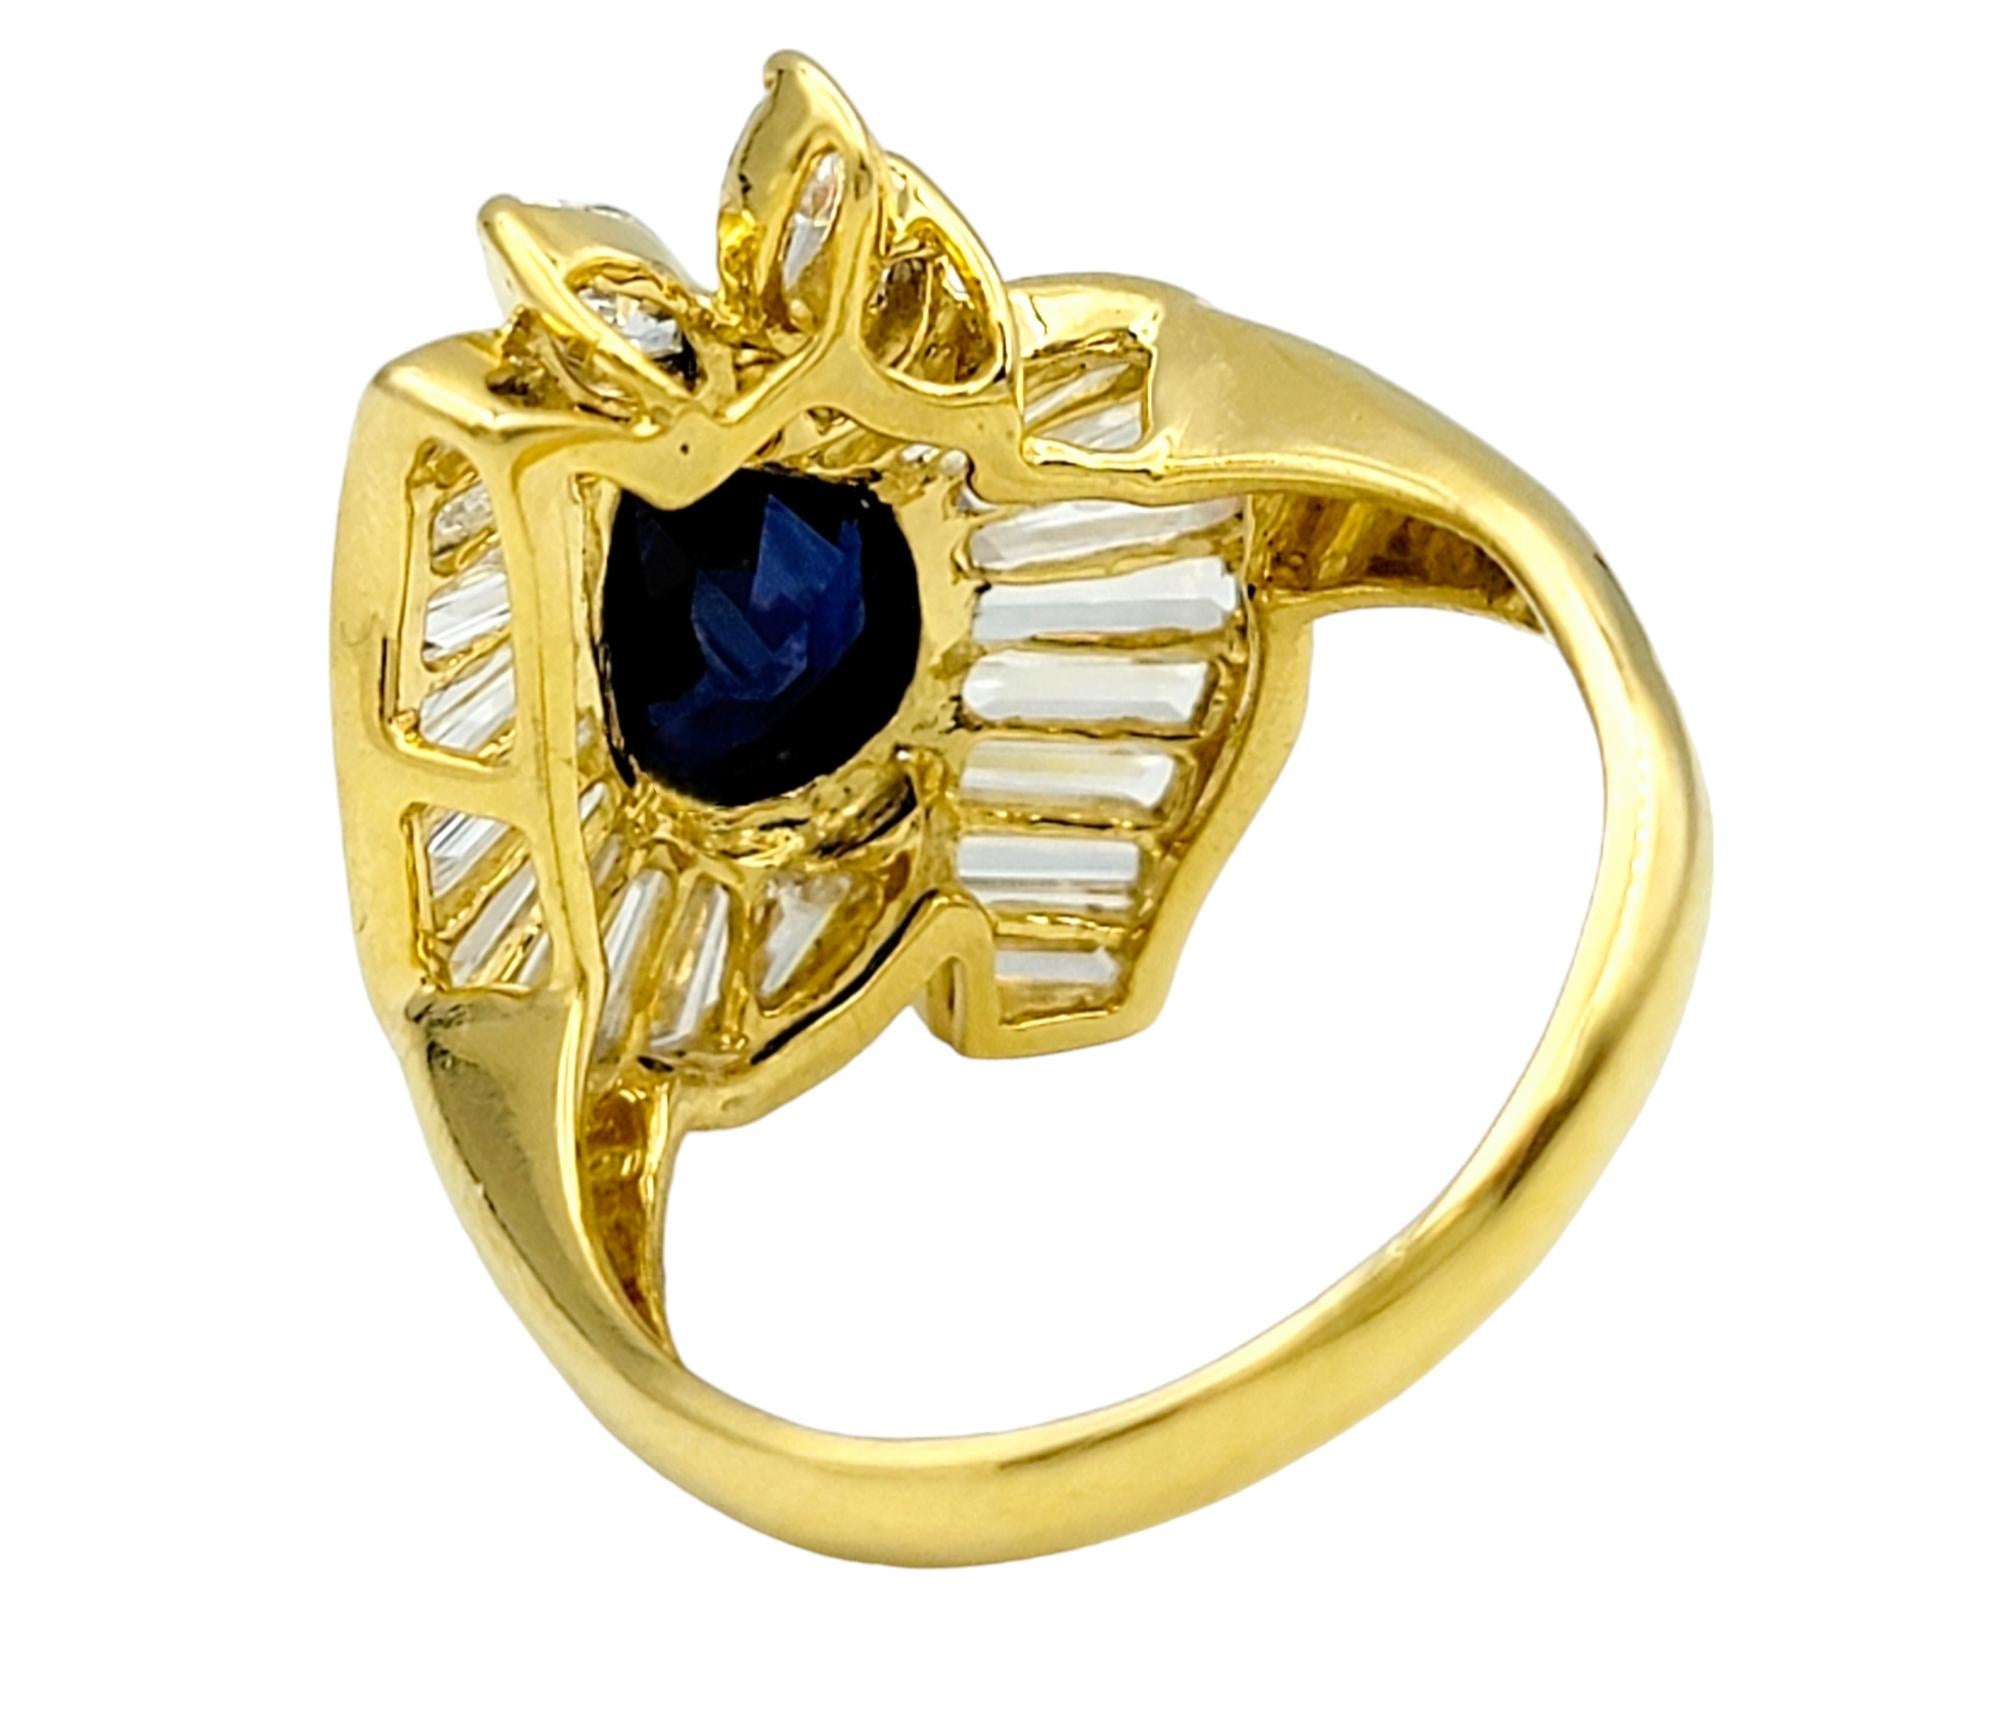 Women's Pear Cut Blue Sapphire Ring with Baguette and Marquise Diamonds in 18 Karat Gold